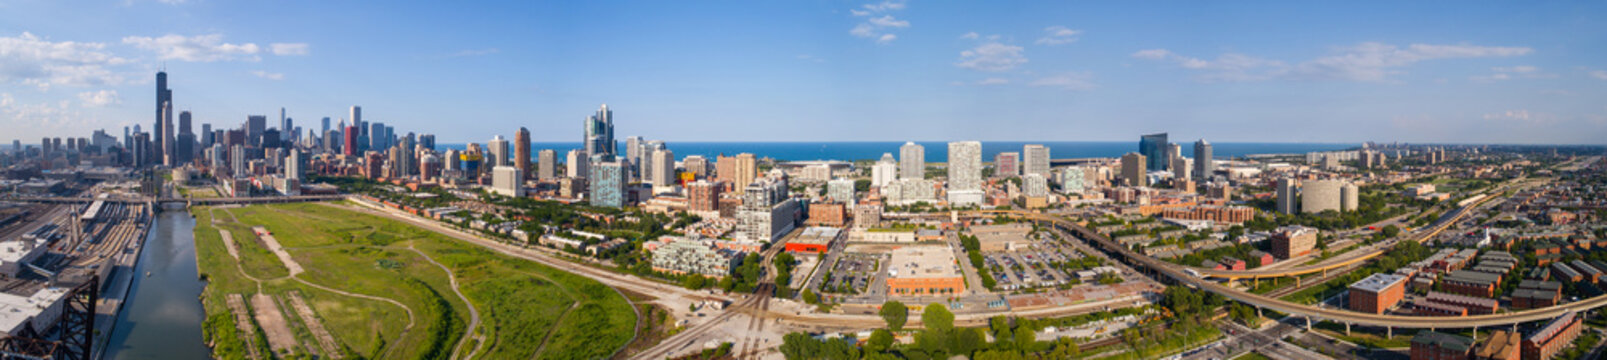 Downtown Chicago cityscape panorama